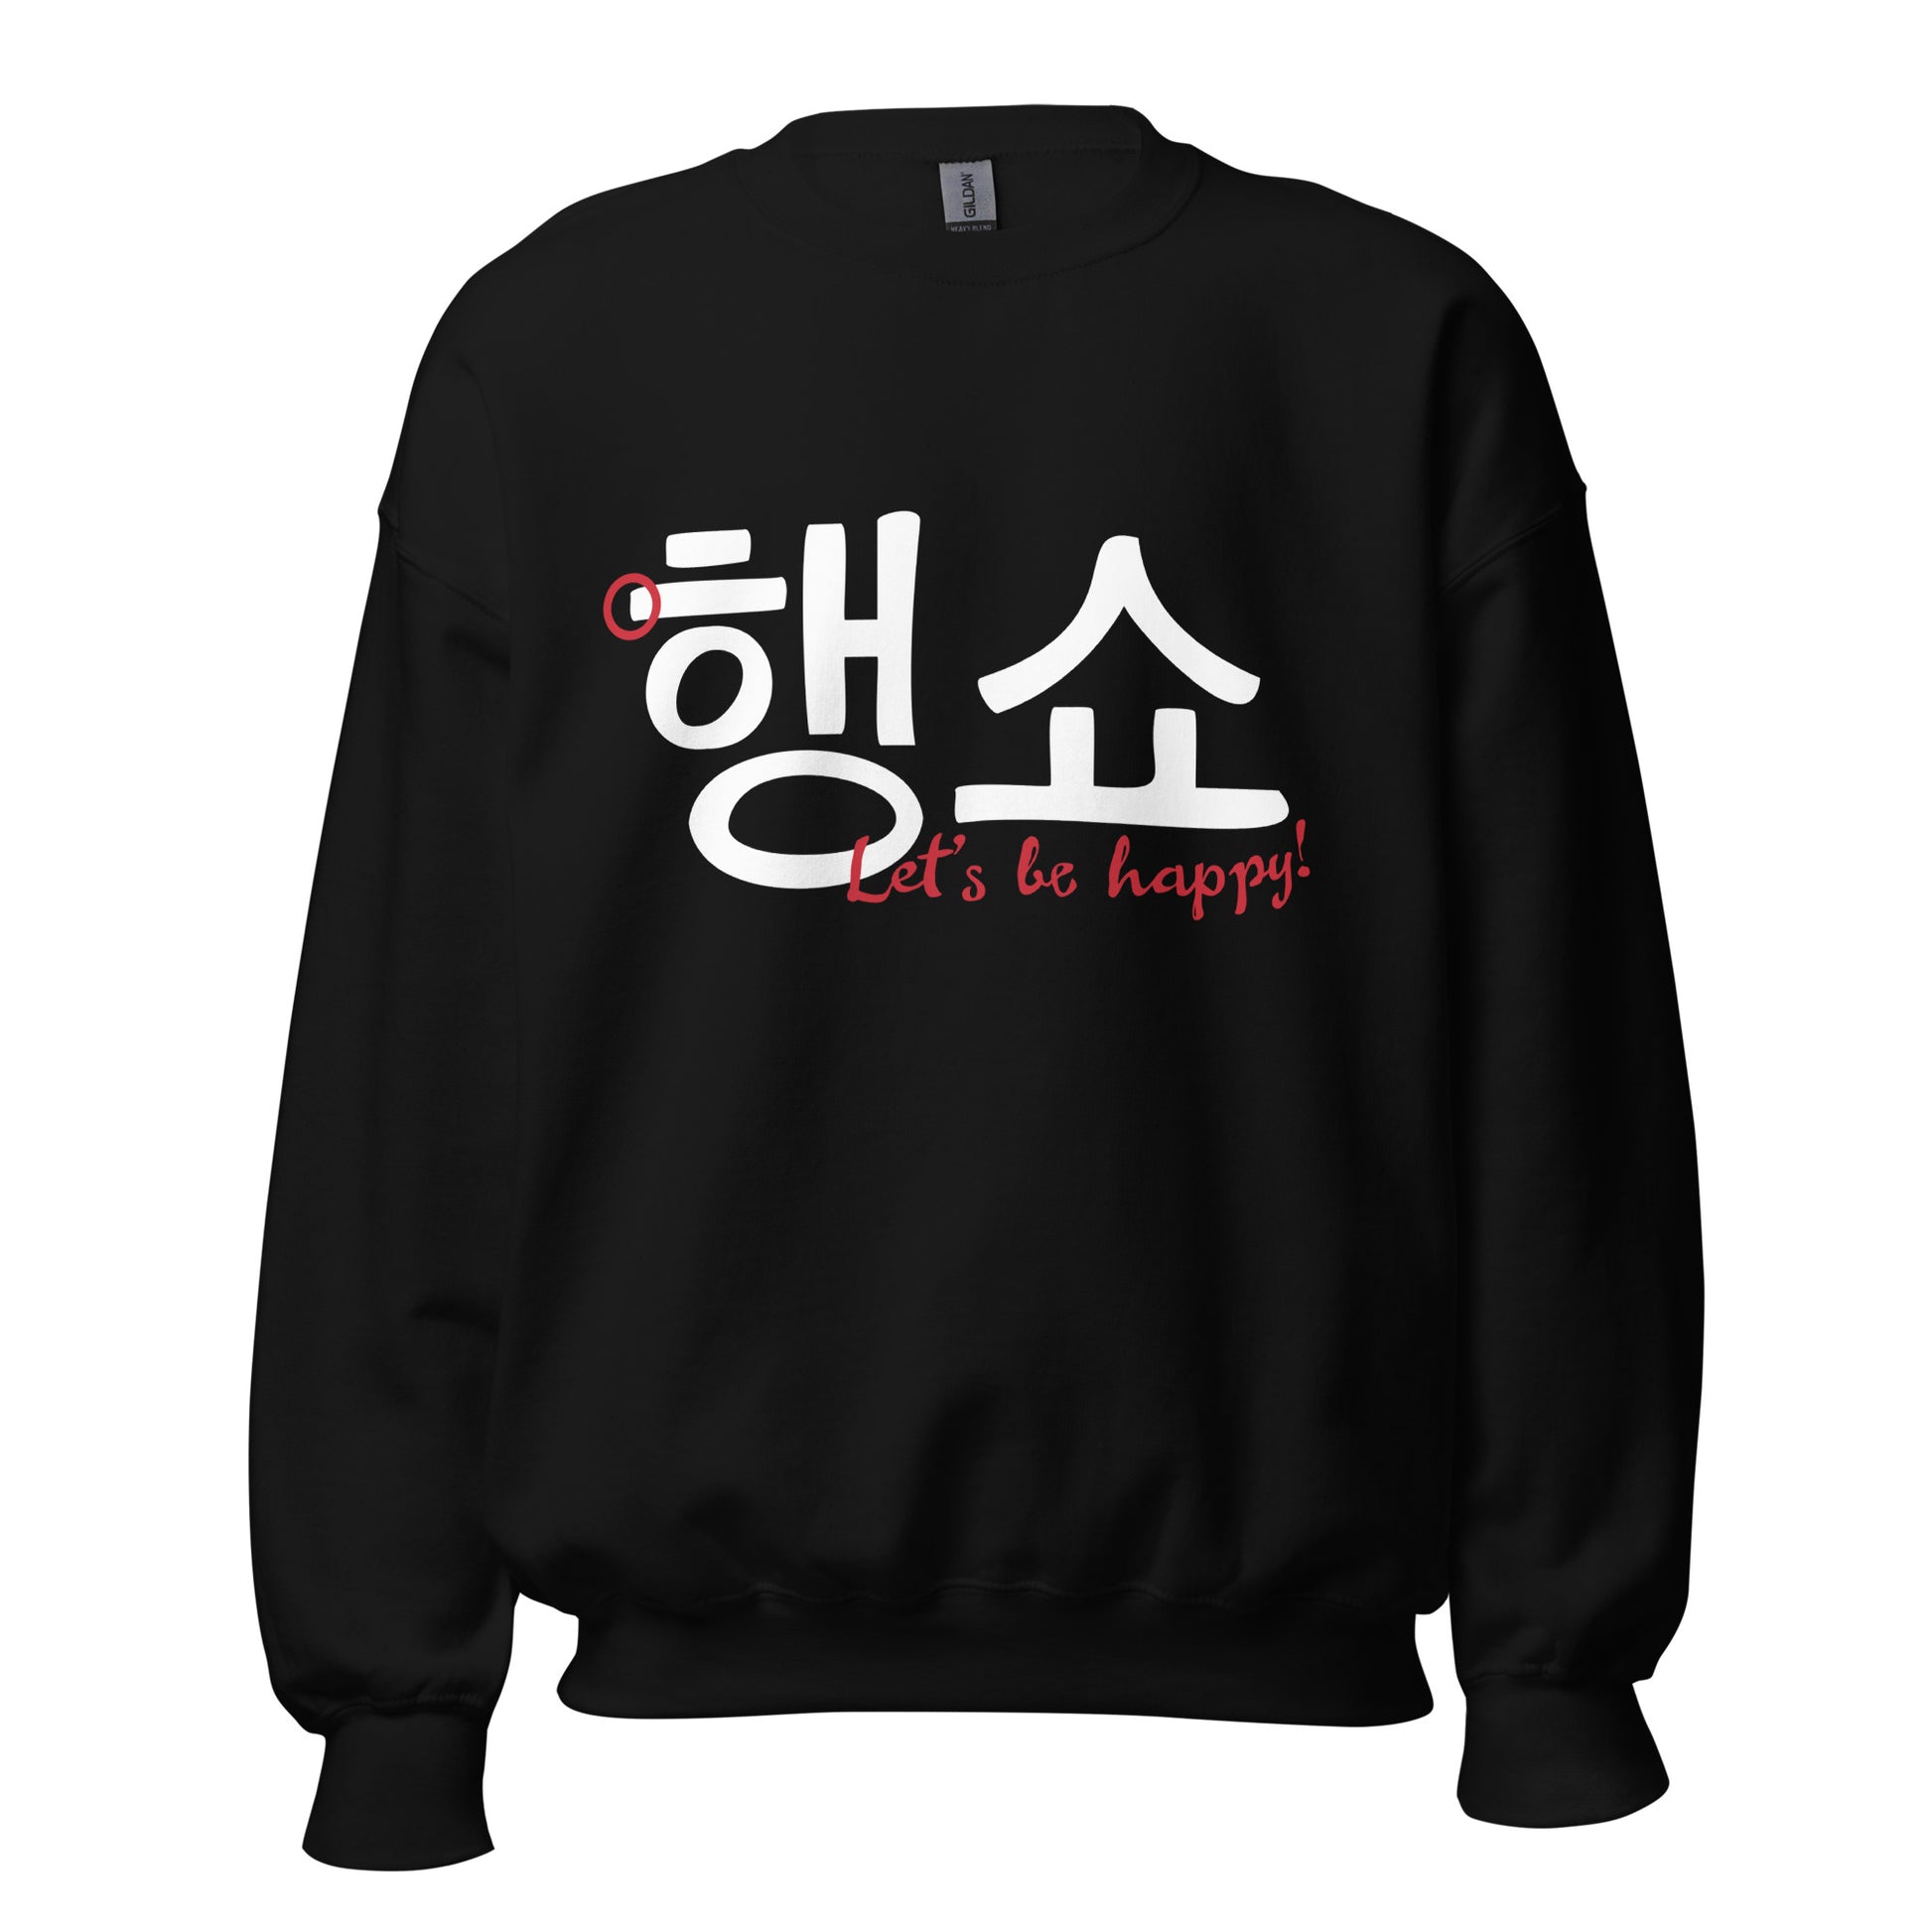 Black sweatshirt with the Hangul and English version of 'Let's be happy! in big prints on the front